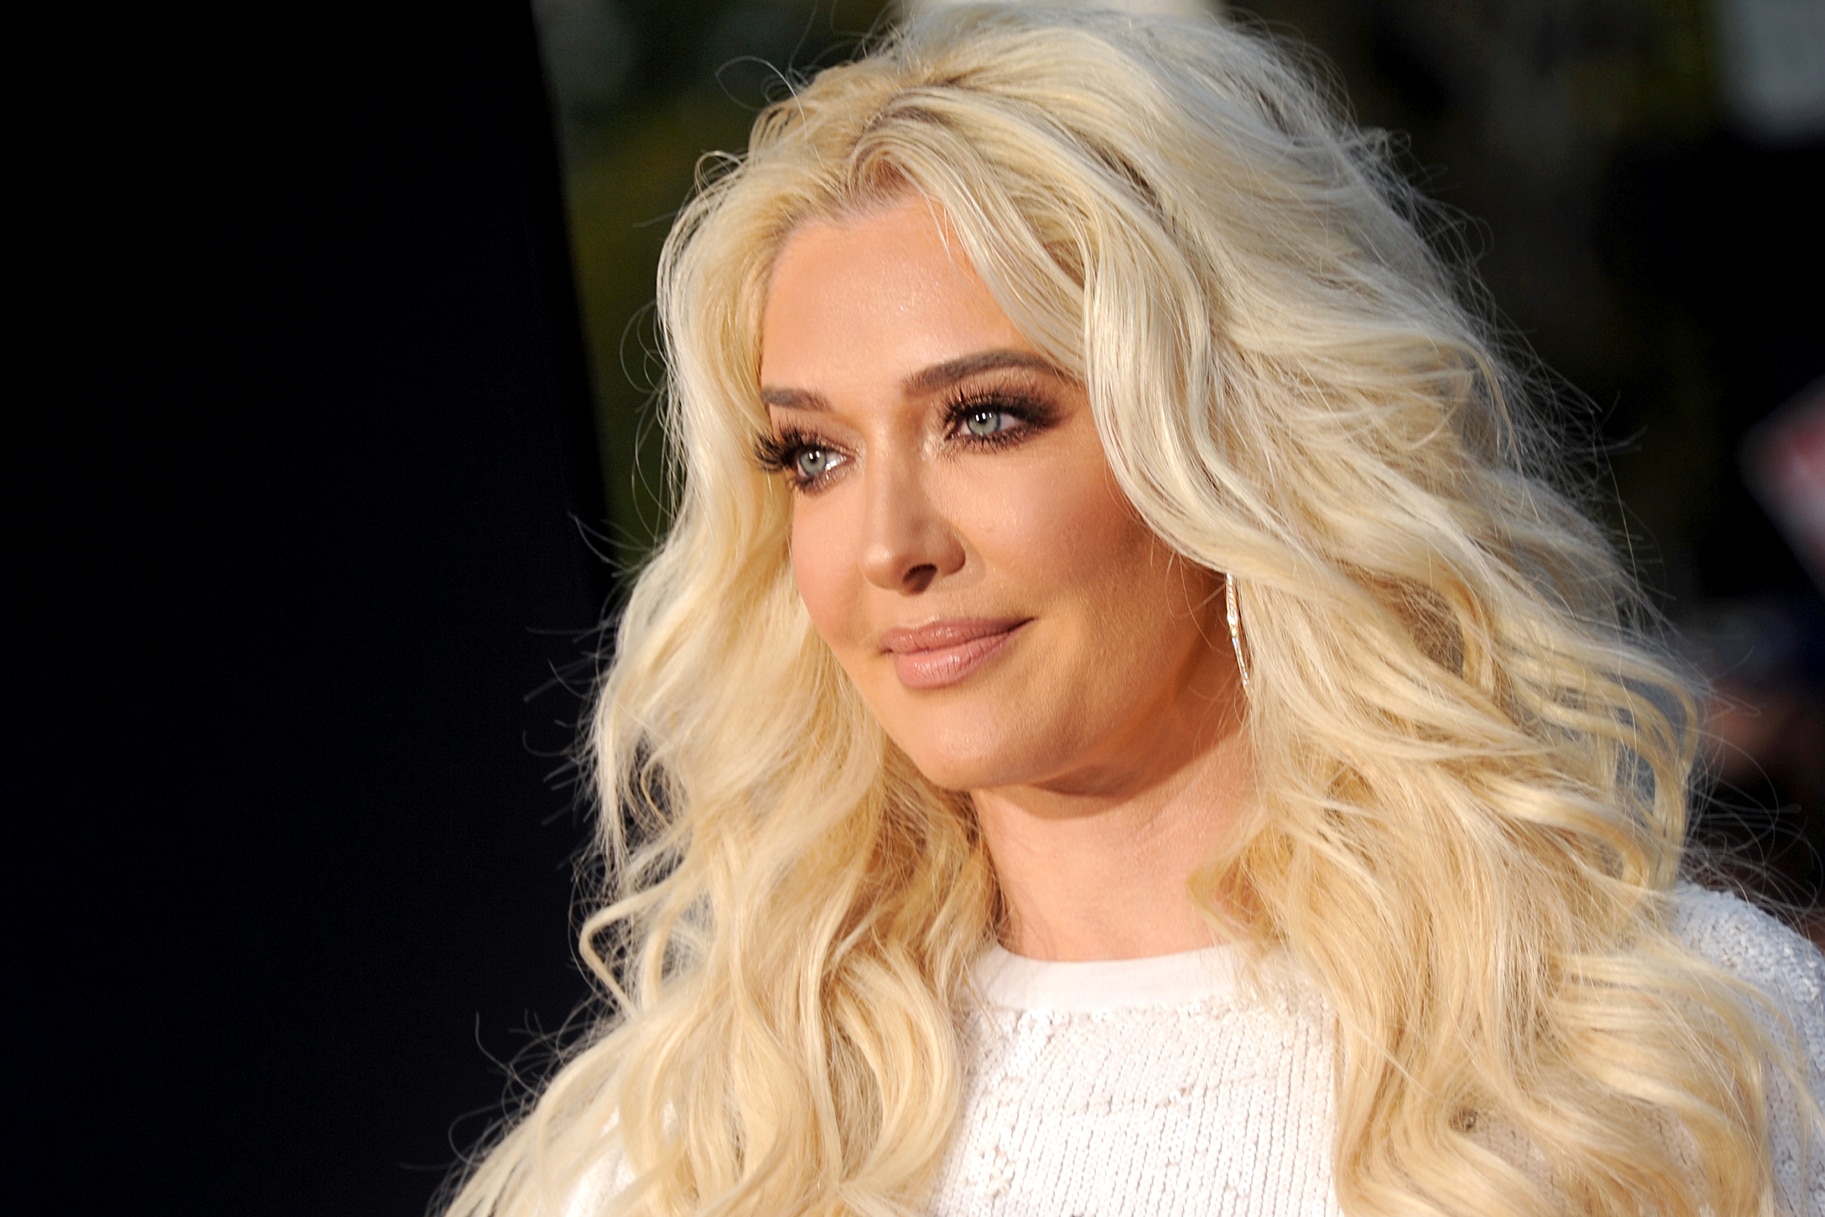 Erika Jayne Arrives For Quotthe Real Housewives Of Beverly